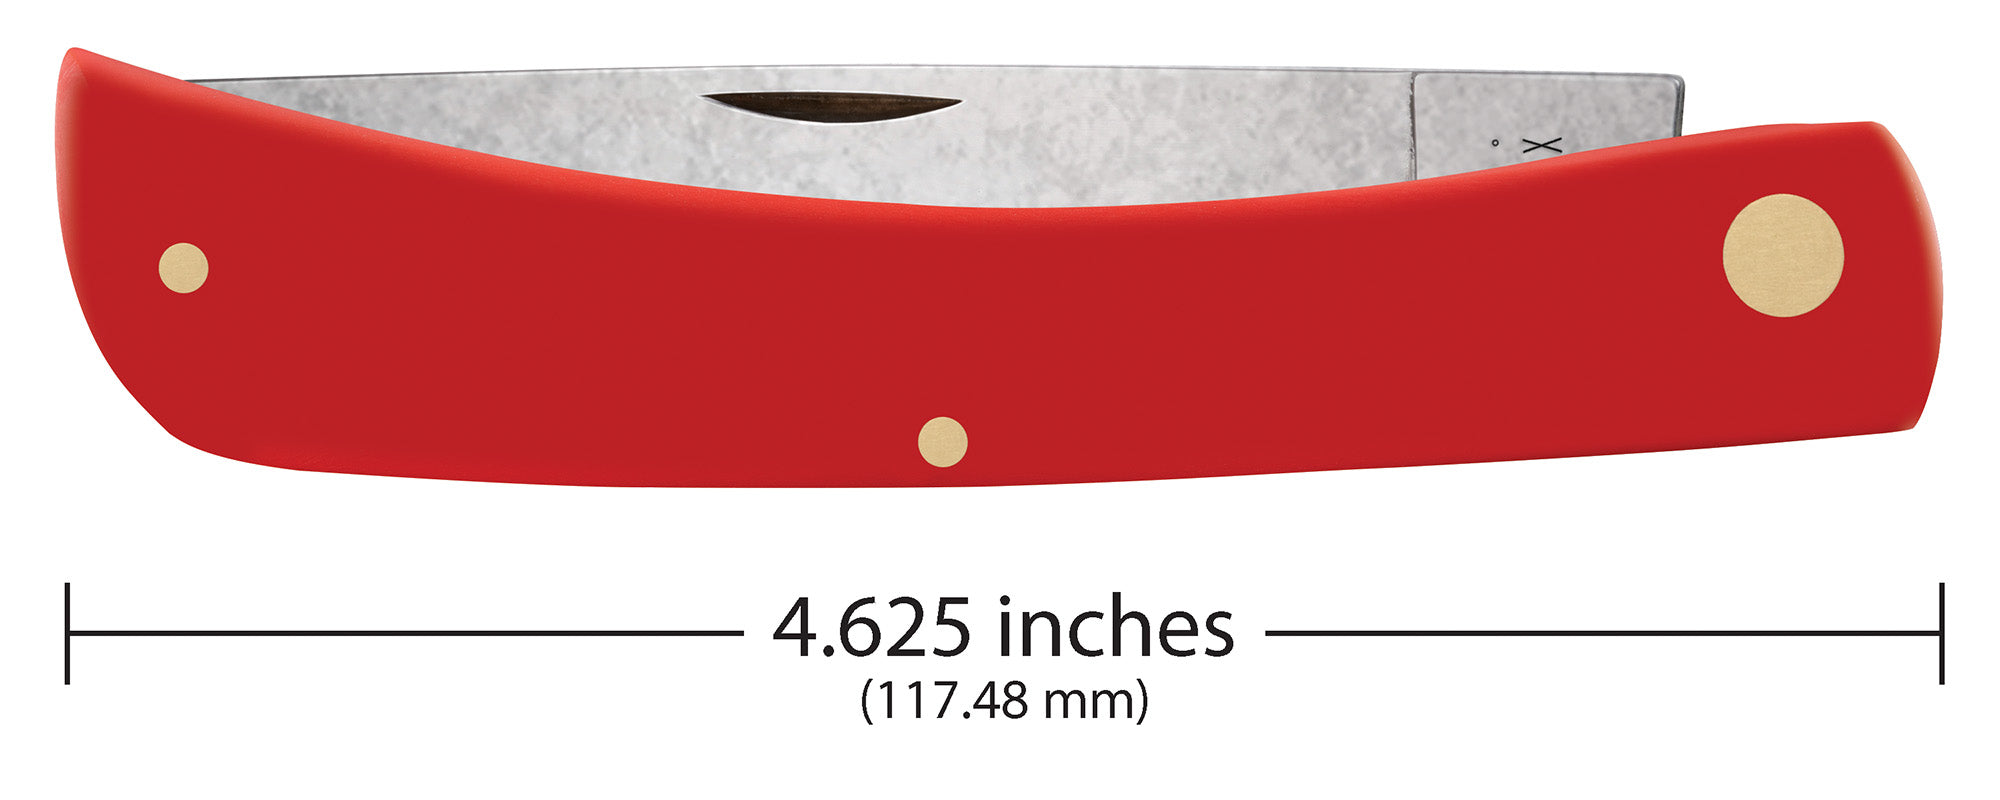 Case XX 'American Workman' Sodbuster 73933 Red Synthetic Carbon Steel  Pocket Knife Pocket Knife - CA73933